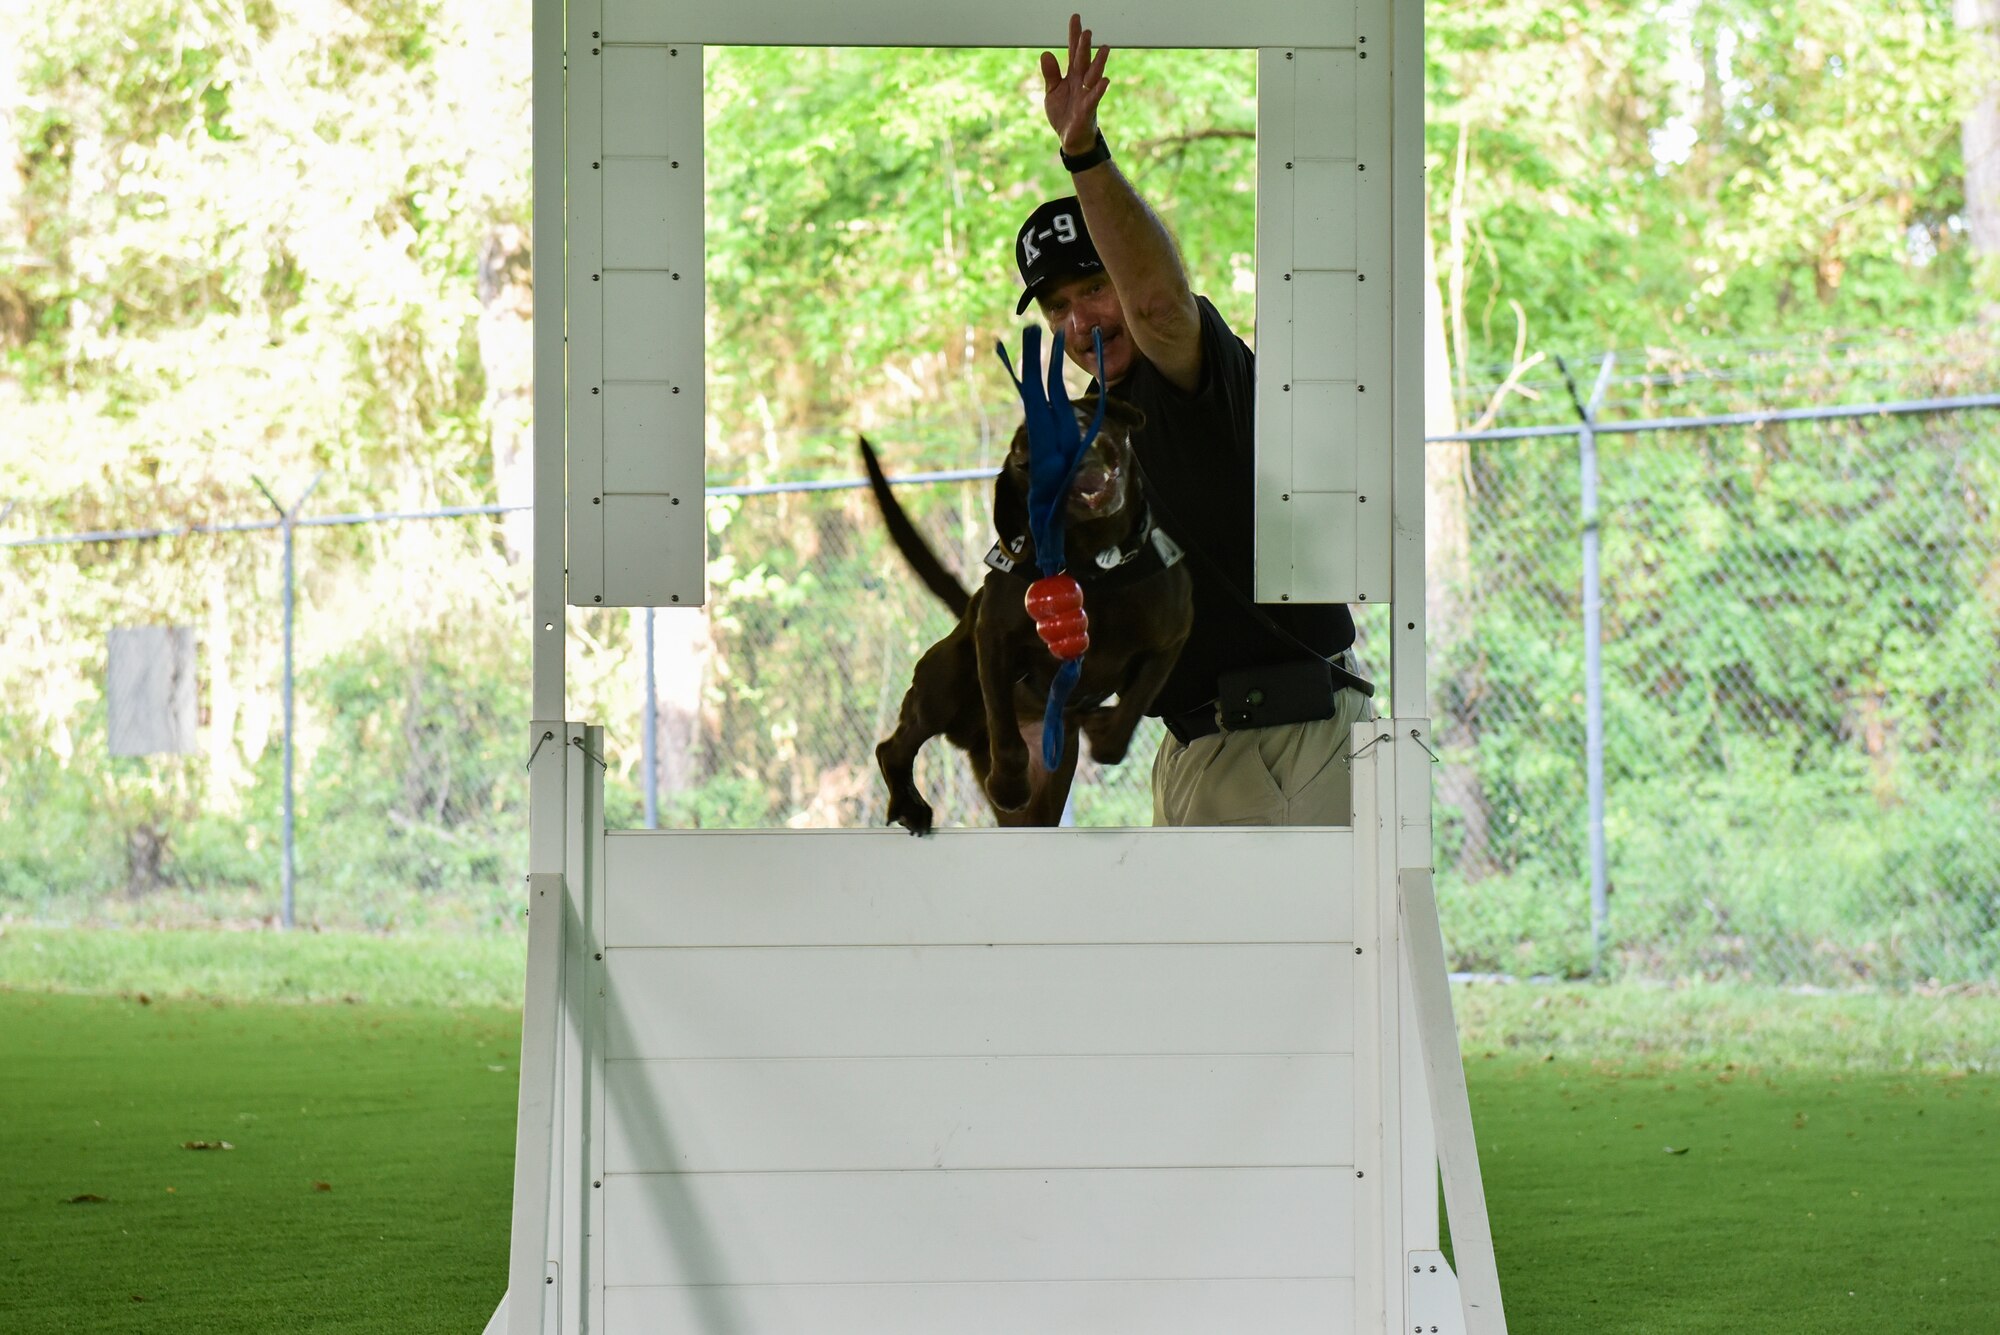 Dave Jamieson, Department of Homeland Security transportation security specialist, trains Hazel, Transportation Security Administration explosives detection canine, to jump through an obstacle during a joint interagency training day at Seymour Johnson Air Force Base, North Carolina, April 20, 2021. The team, Jamieson and Hazel, are responsible for the safety of the traveling public. (U.S. Air Force photo by Staff Sgt. Kenneth Boyton)